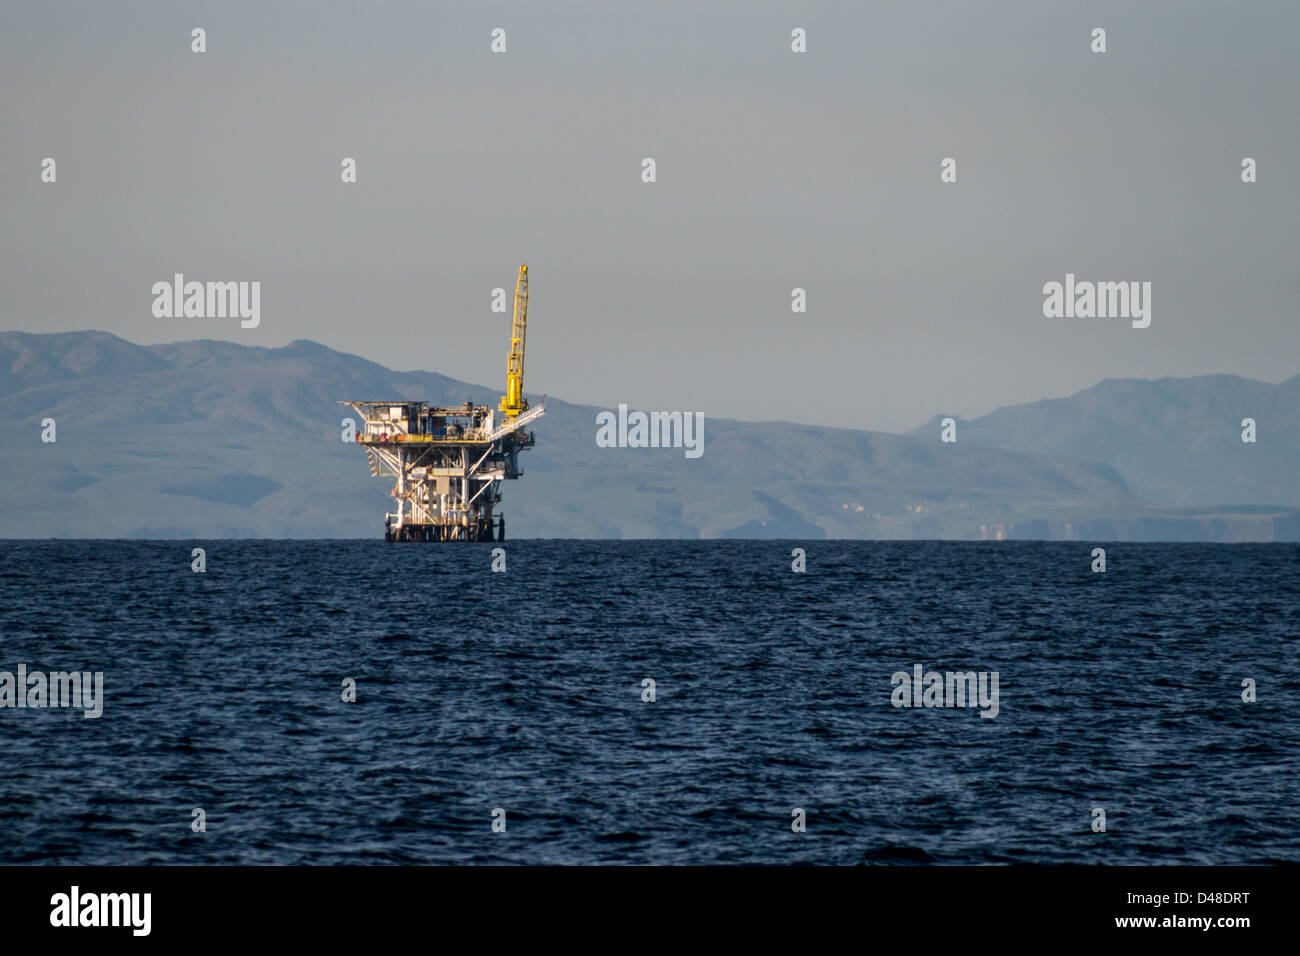 Offshore oil platform located off the coast of the Channel Island, California Stock Photo